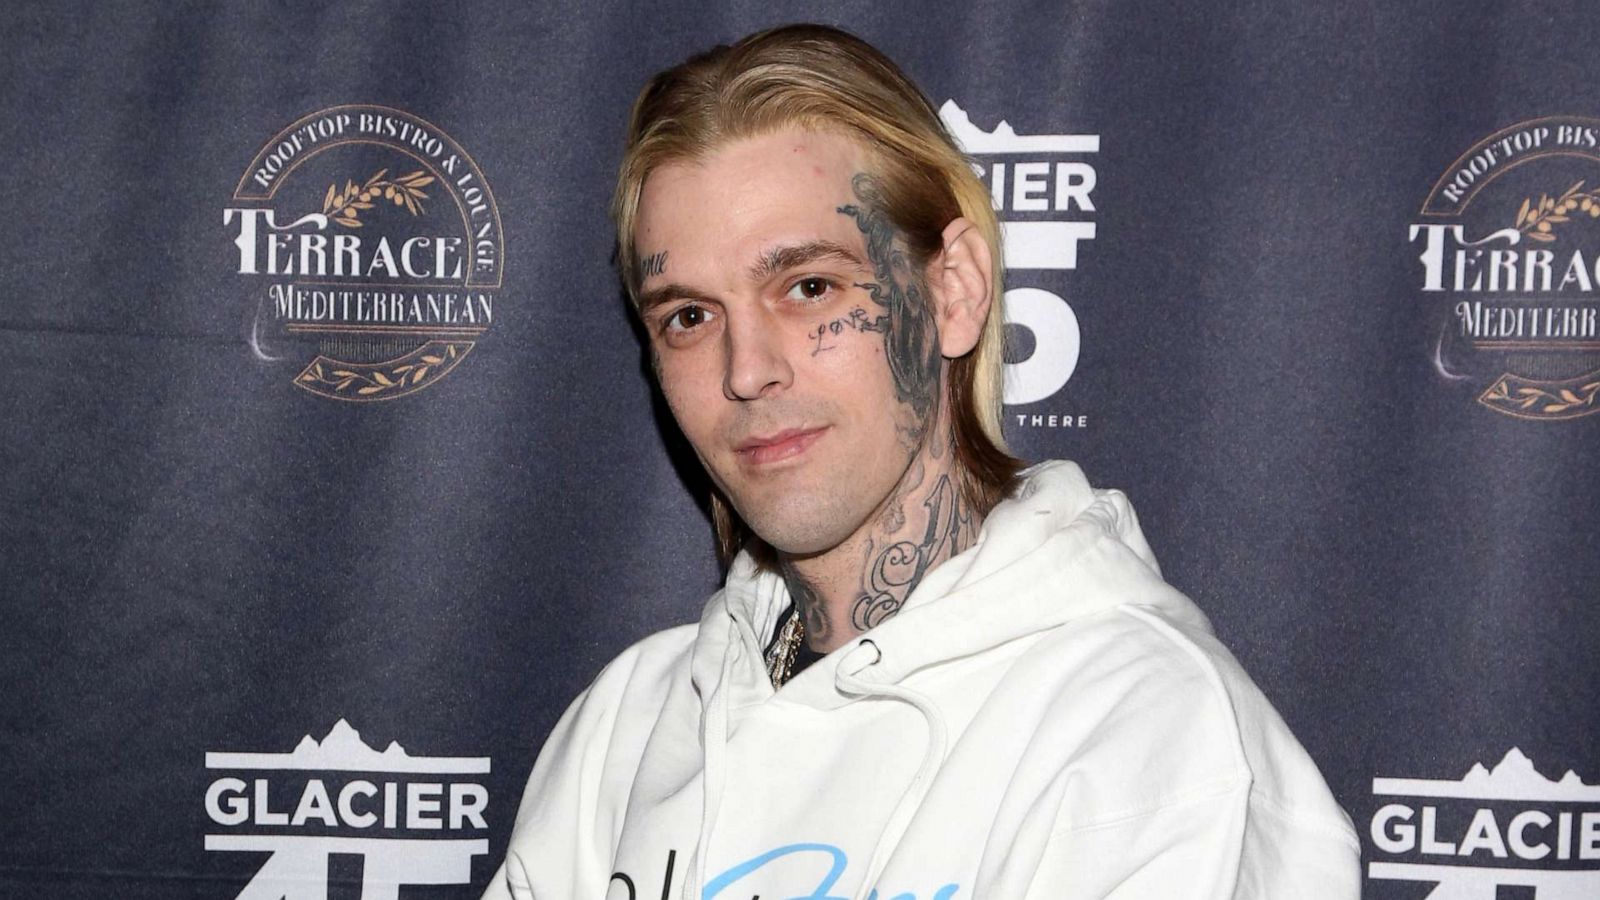 From childhood stardom to cautionary tale: The life, legacy and final days  of Aaron Carter - ABC News